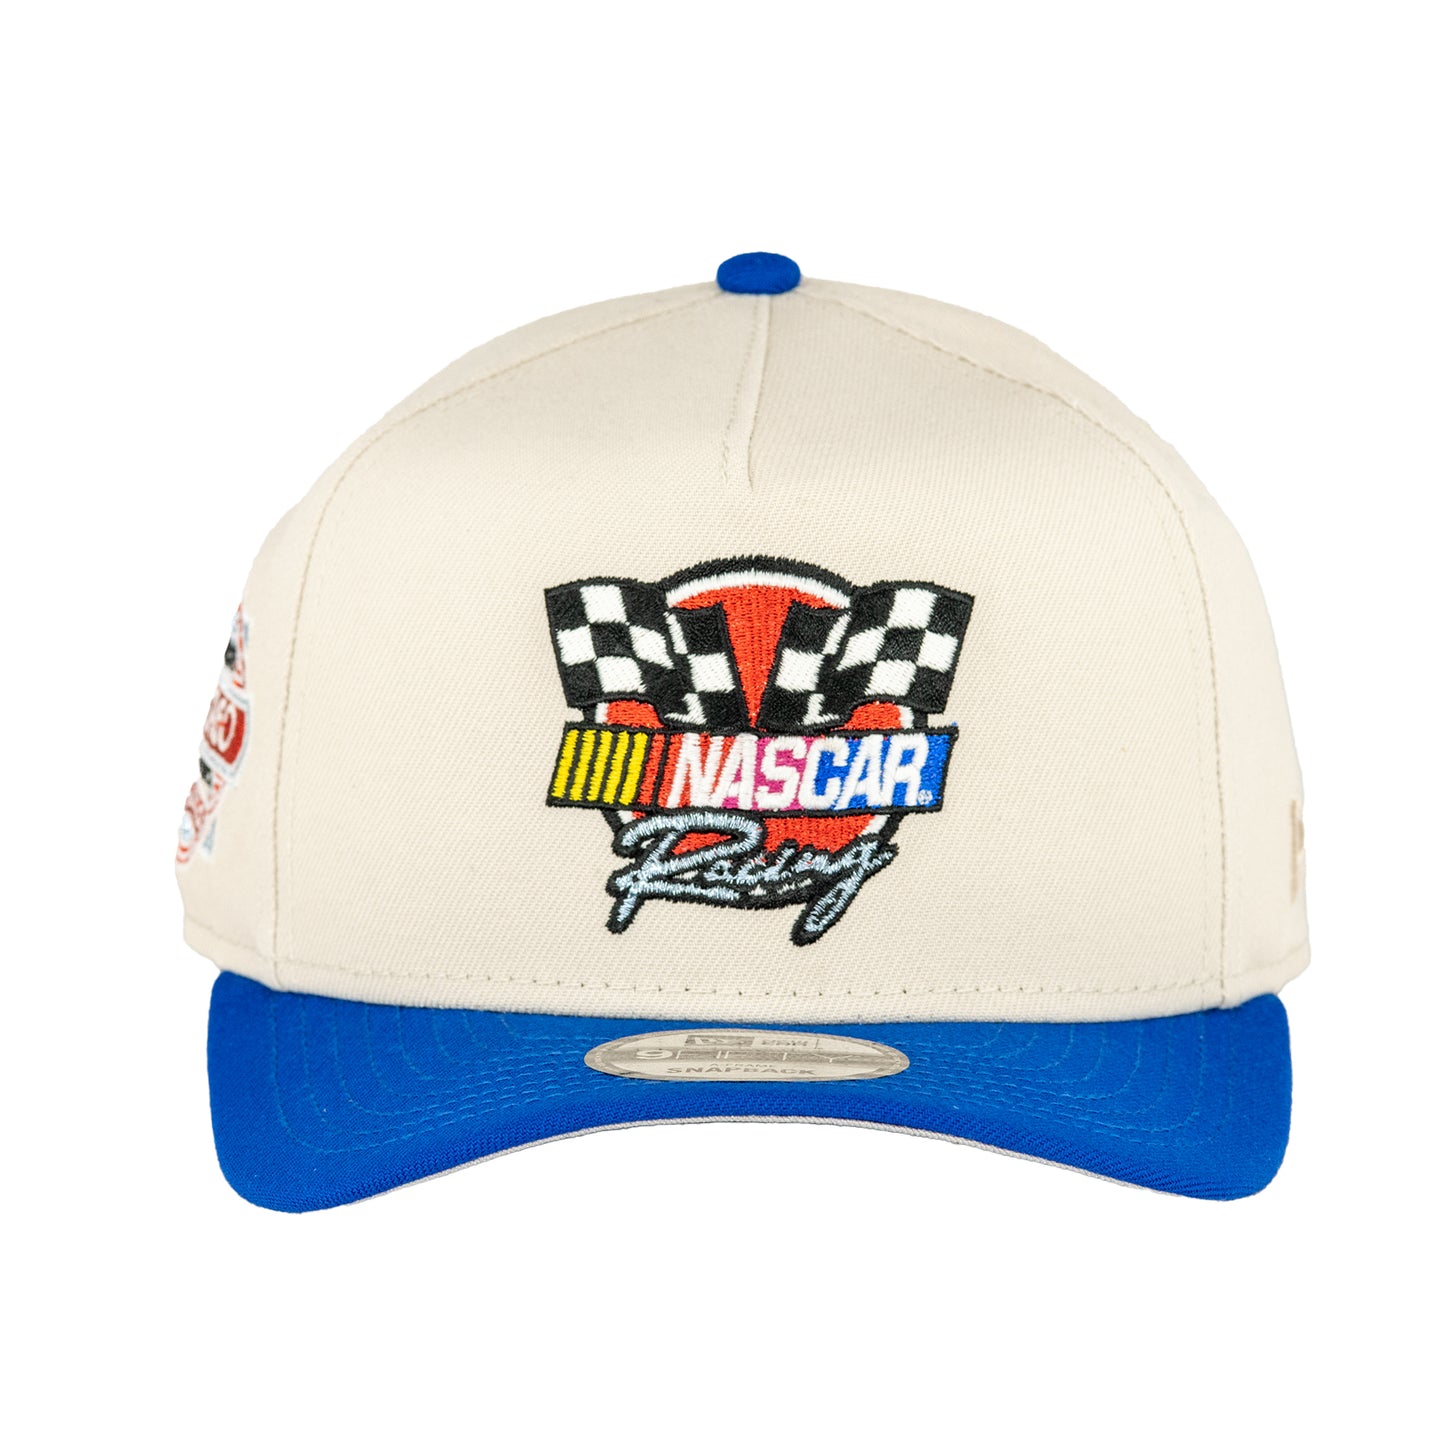 Nascar Racing Chicago Street Race Stone/Blue New Era 9FIFTY A-Frame Adjustable Hat